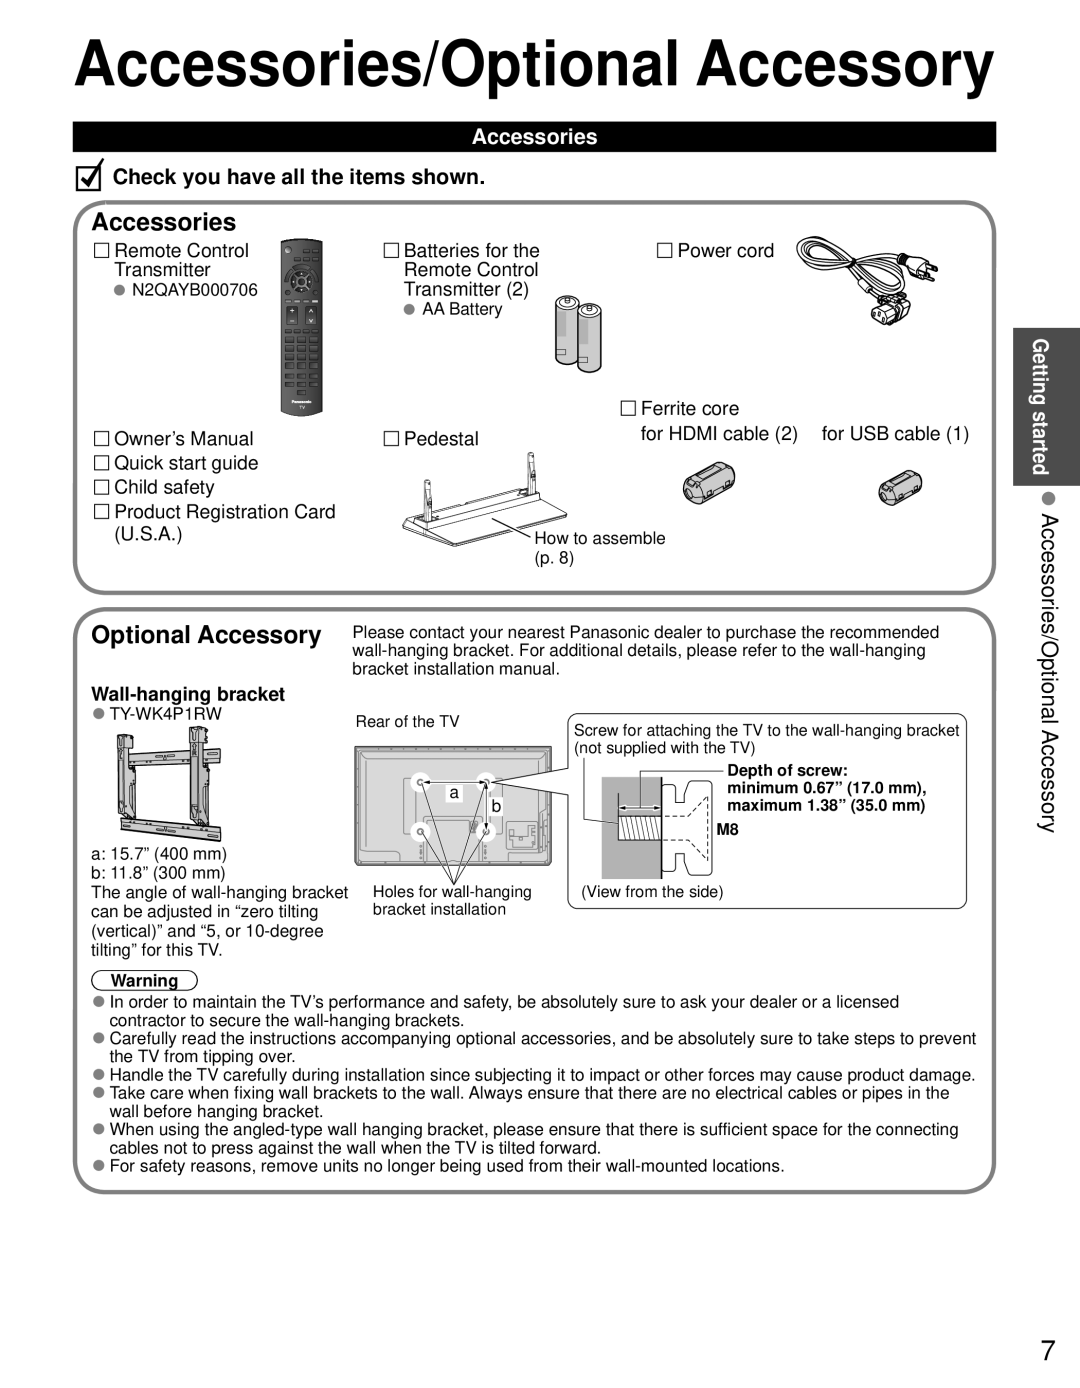 Panasonic TC-P50U50 owner manual Accessories/Optional Accessory, Check you have all the items shown, Wall-hanging bracket 